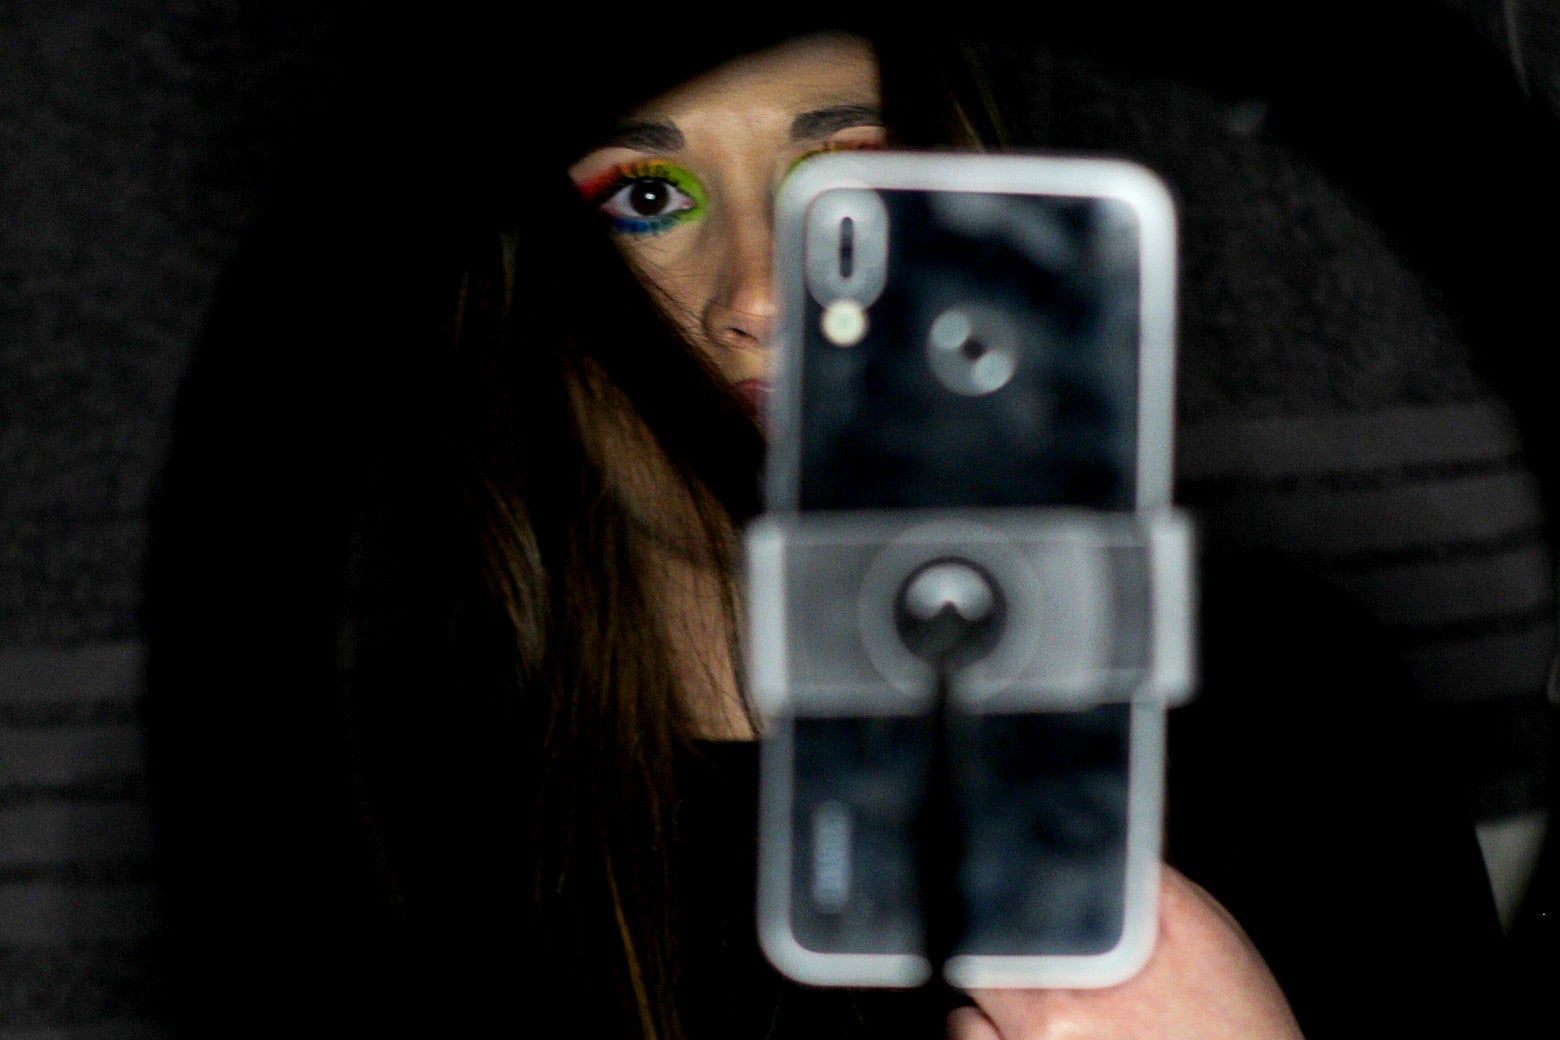 A person partially visible behind a smartphone on a stand.